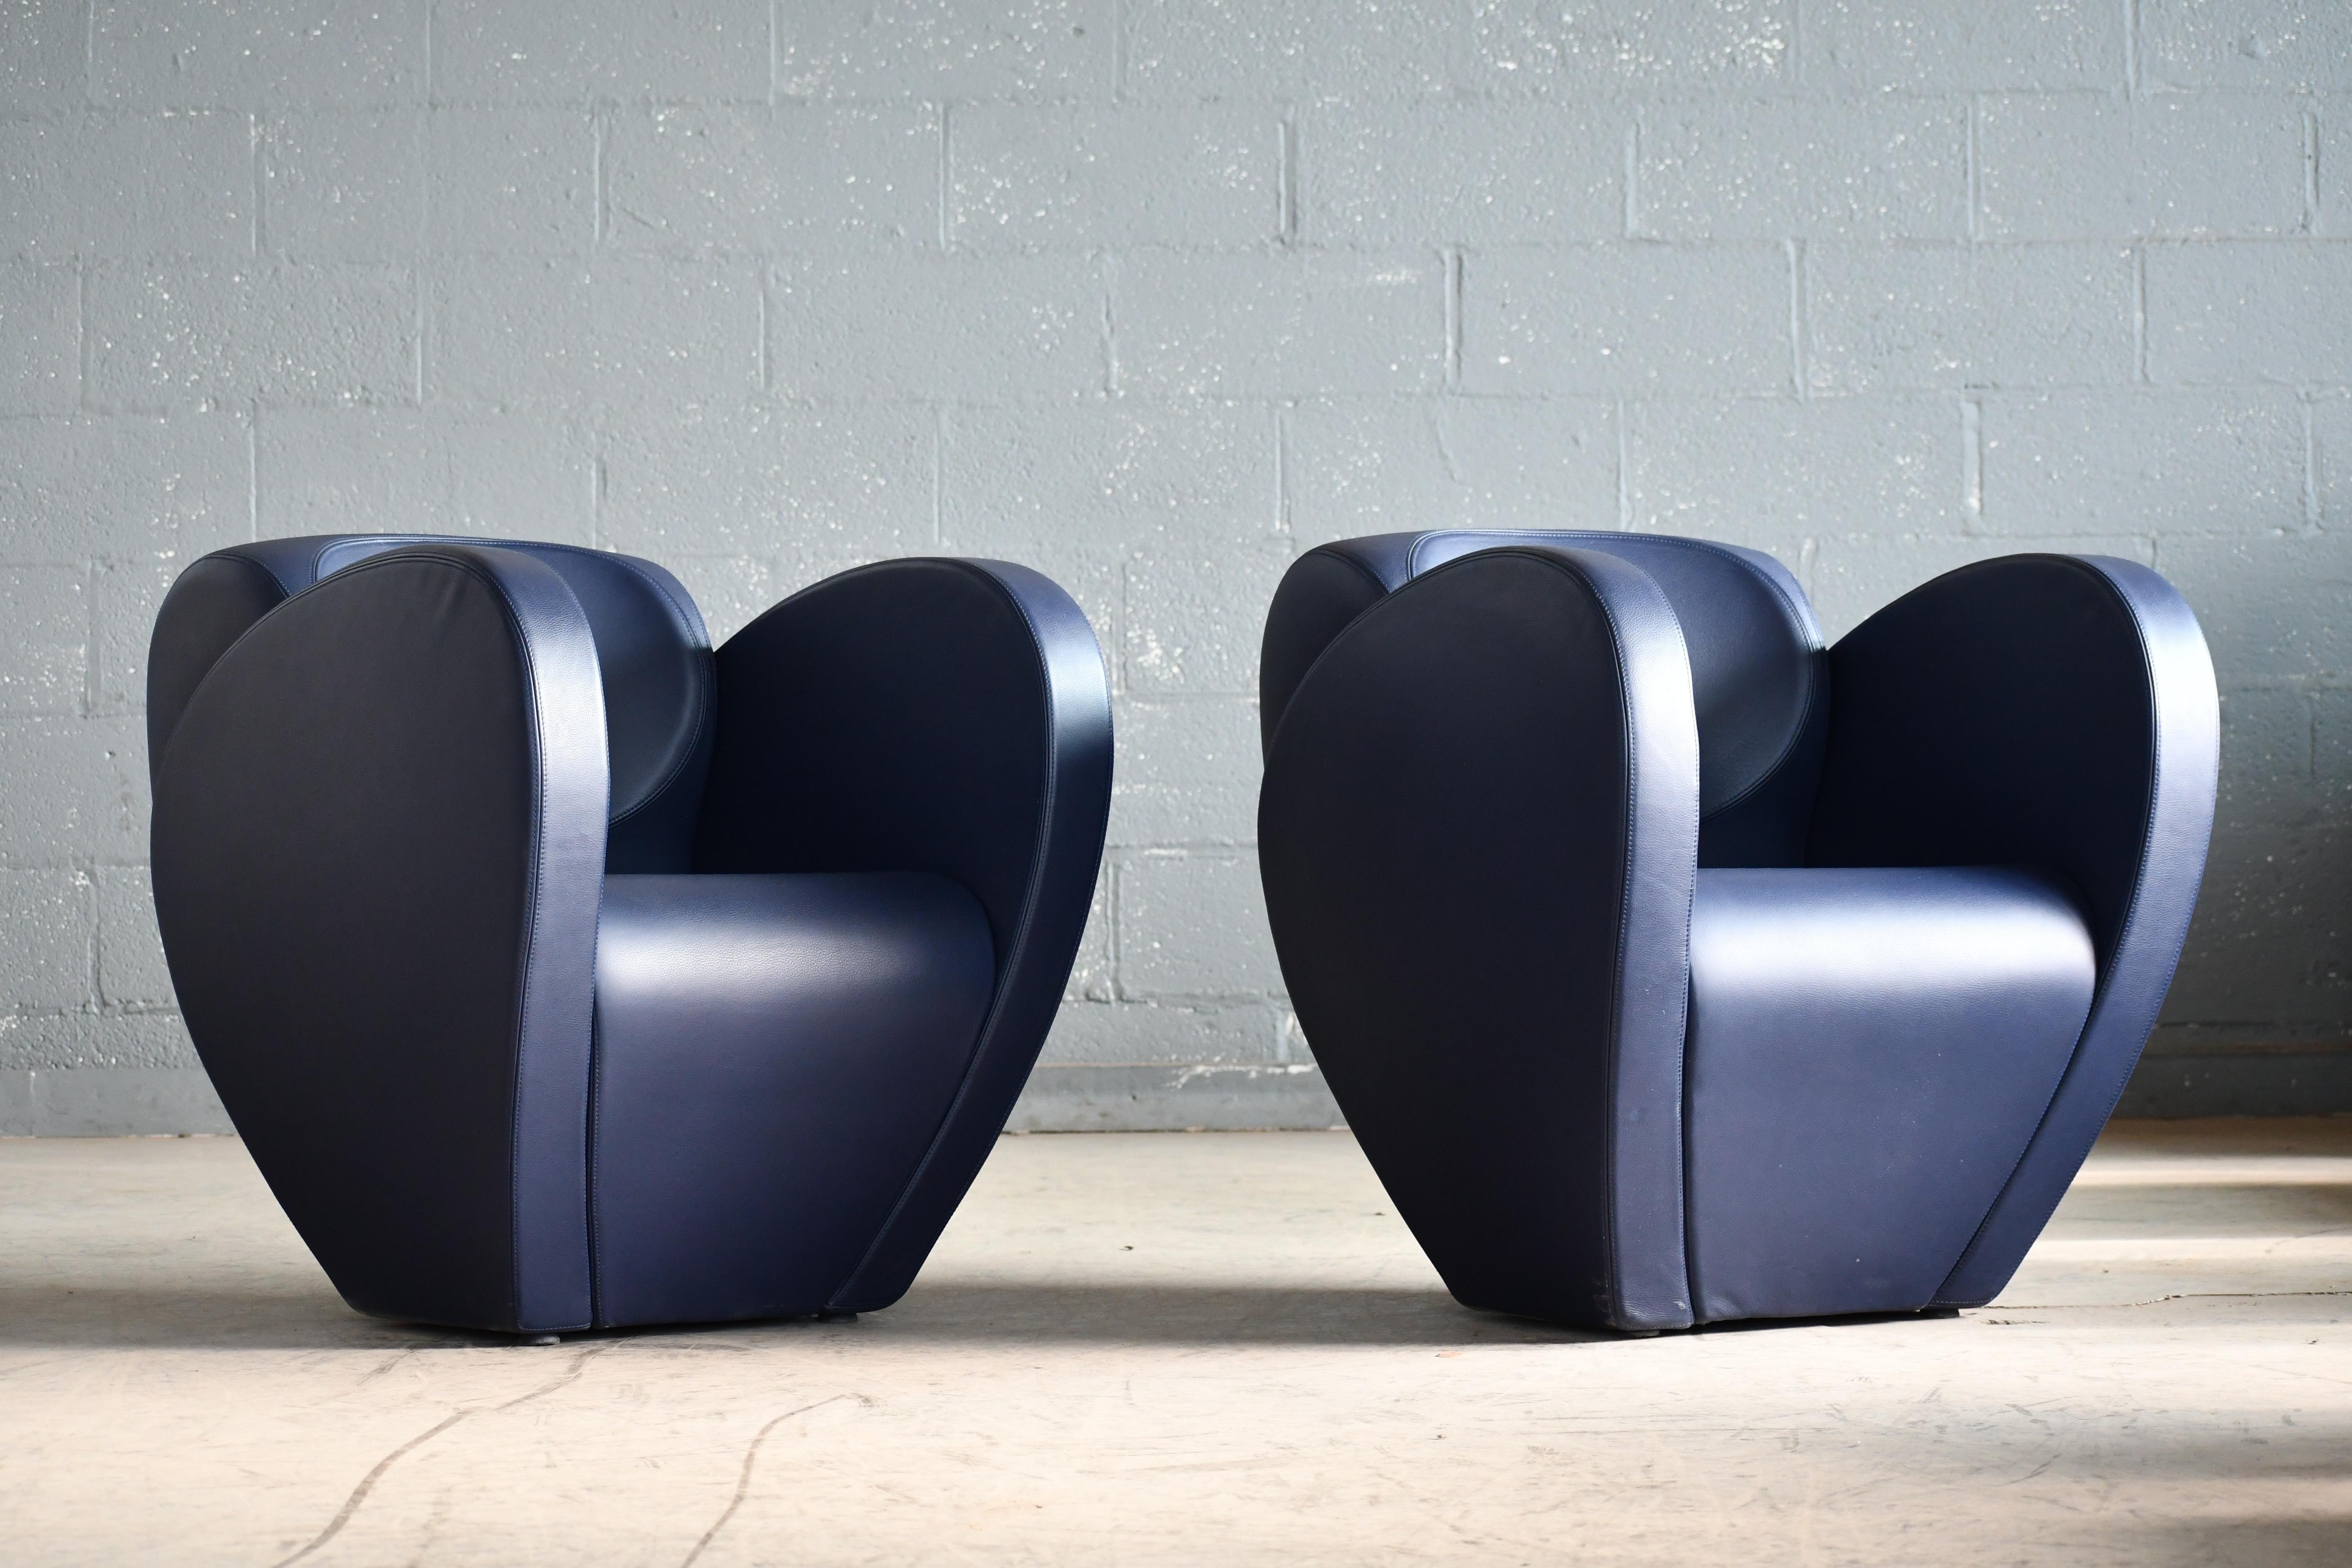 This amazing armchair from the Spring collection was designed by the famous Ron Arad as Model 10 in 1991 for Moroso of Italy. Frame upholstered with polyurethane foam covered in a soft blue leather. Extraordinary lines from all angles and very